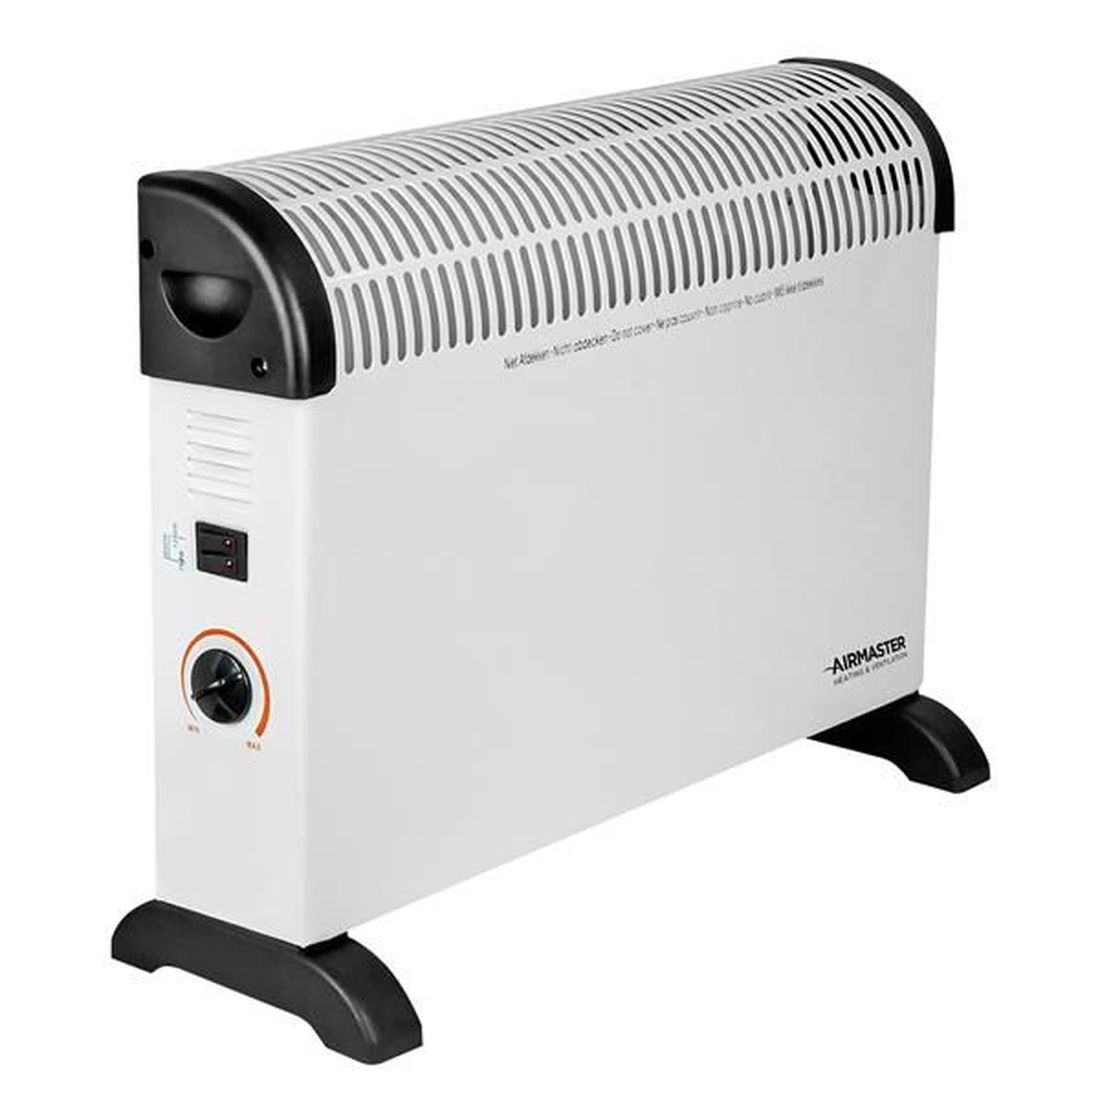 Airmaster Convector Heater 2.0kW            